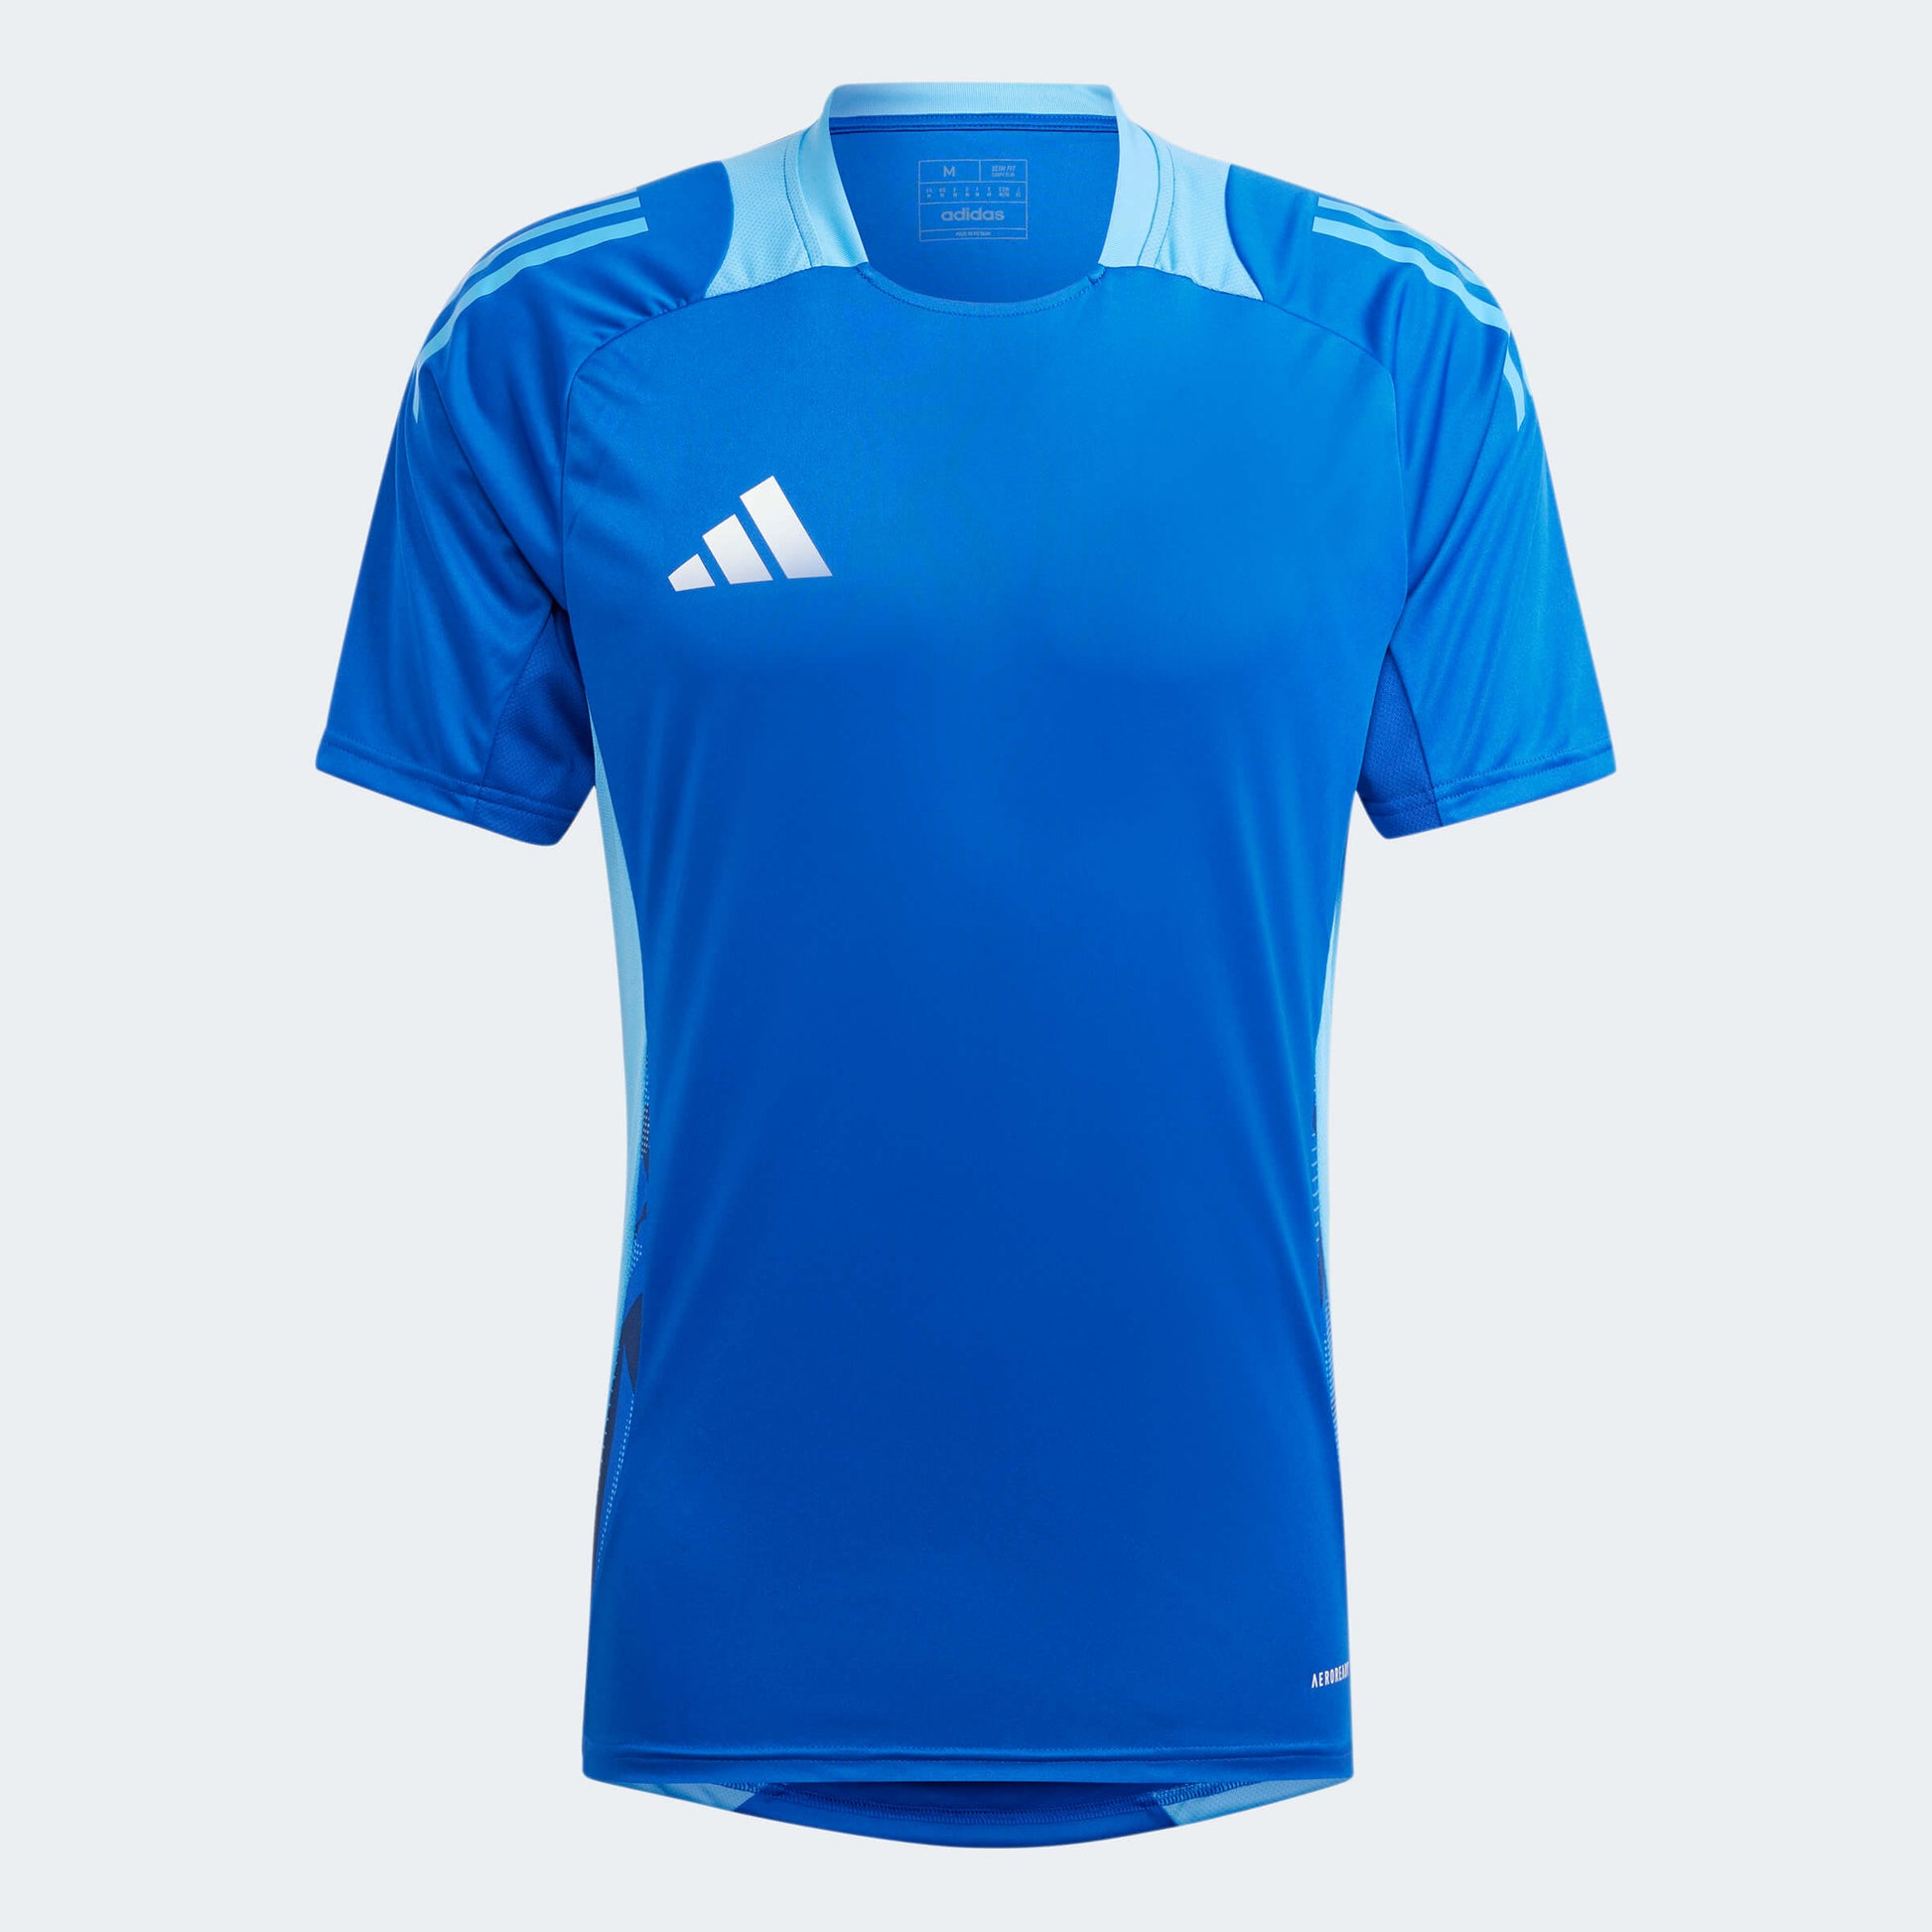 adidas Tiro24 Competition Training Jersey Team Royal Blue (Front)